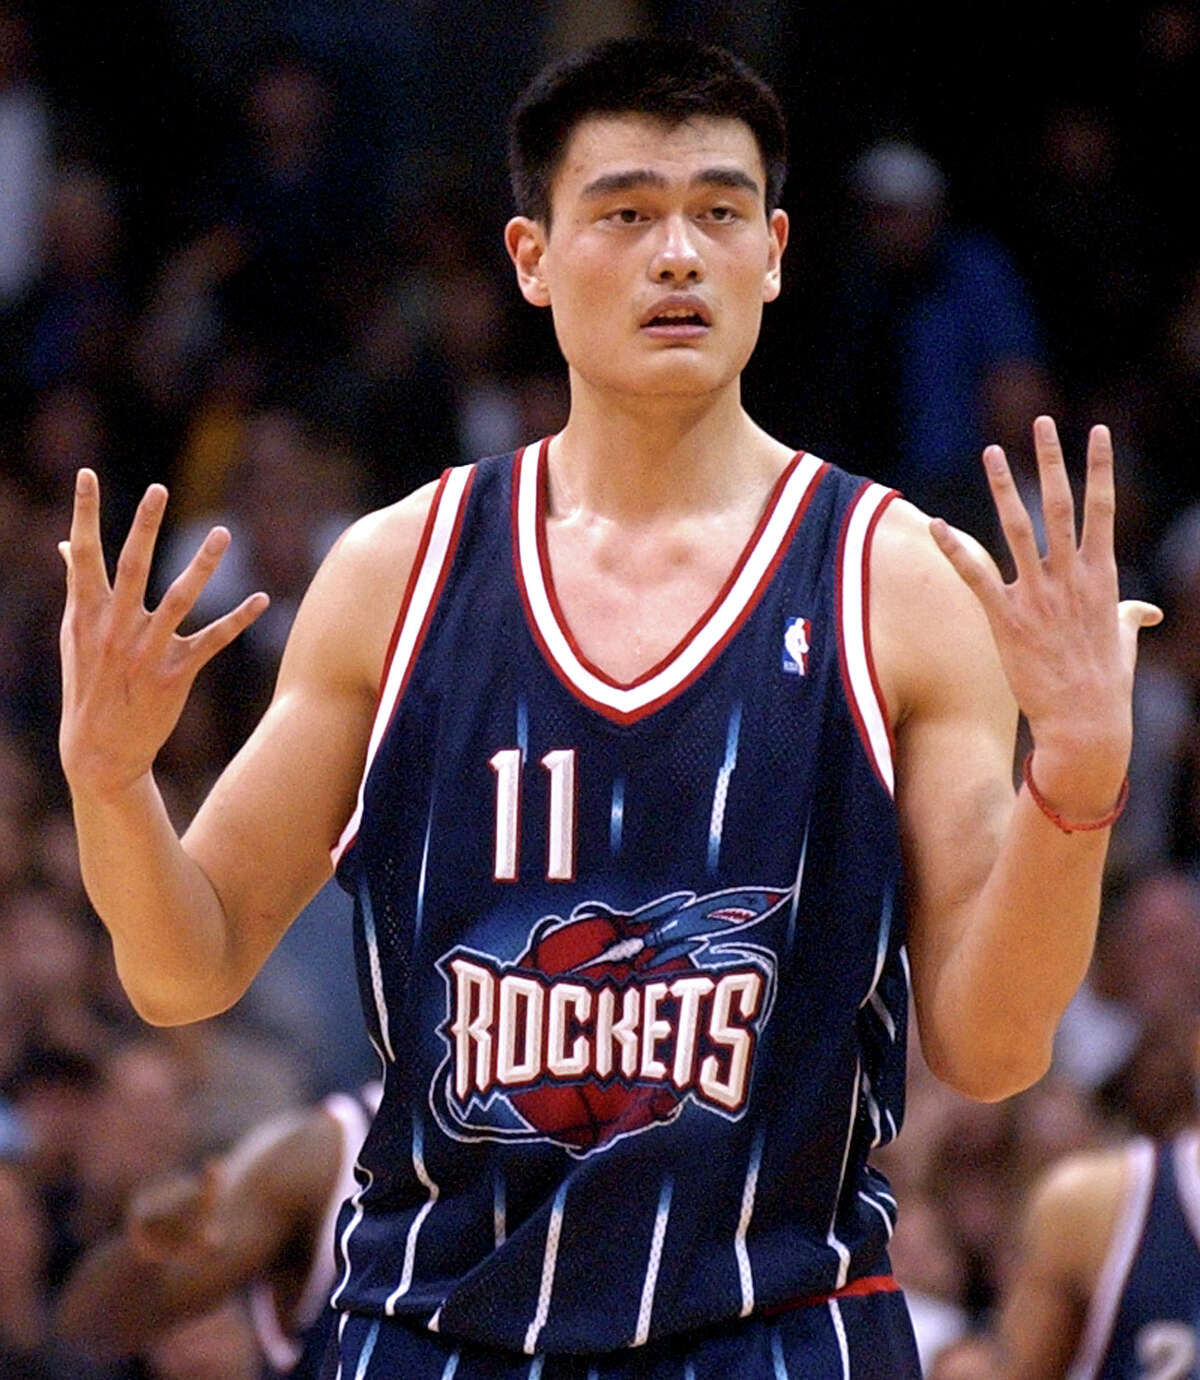 Rockets celebrate Yao Ming as Hall of Famer's No. 11 jersey retired - ABC7  Los Angeles